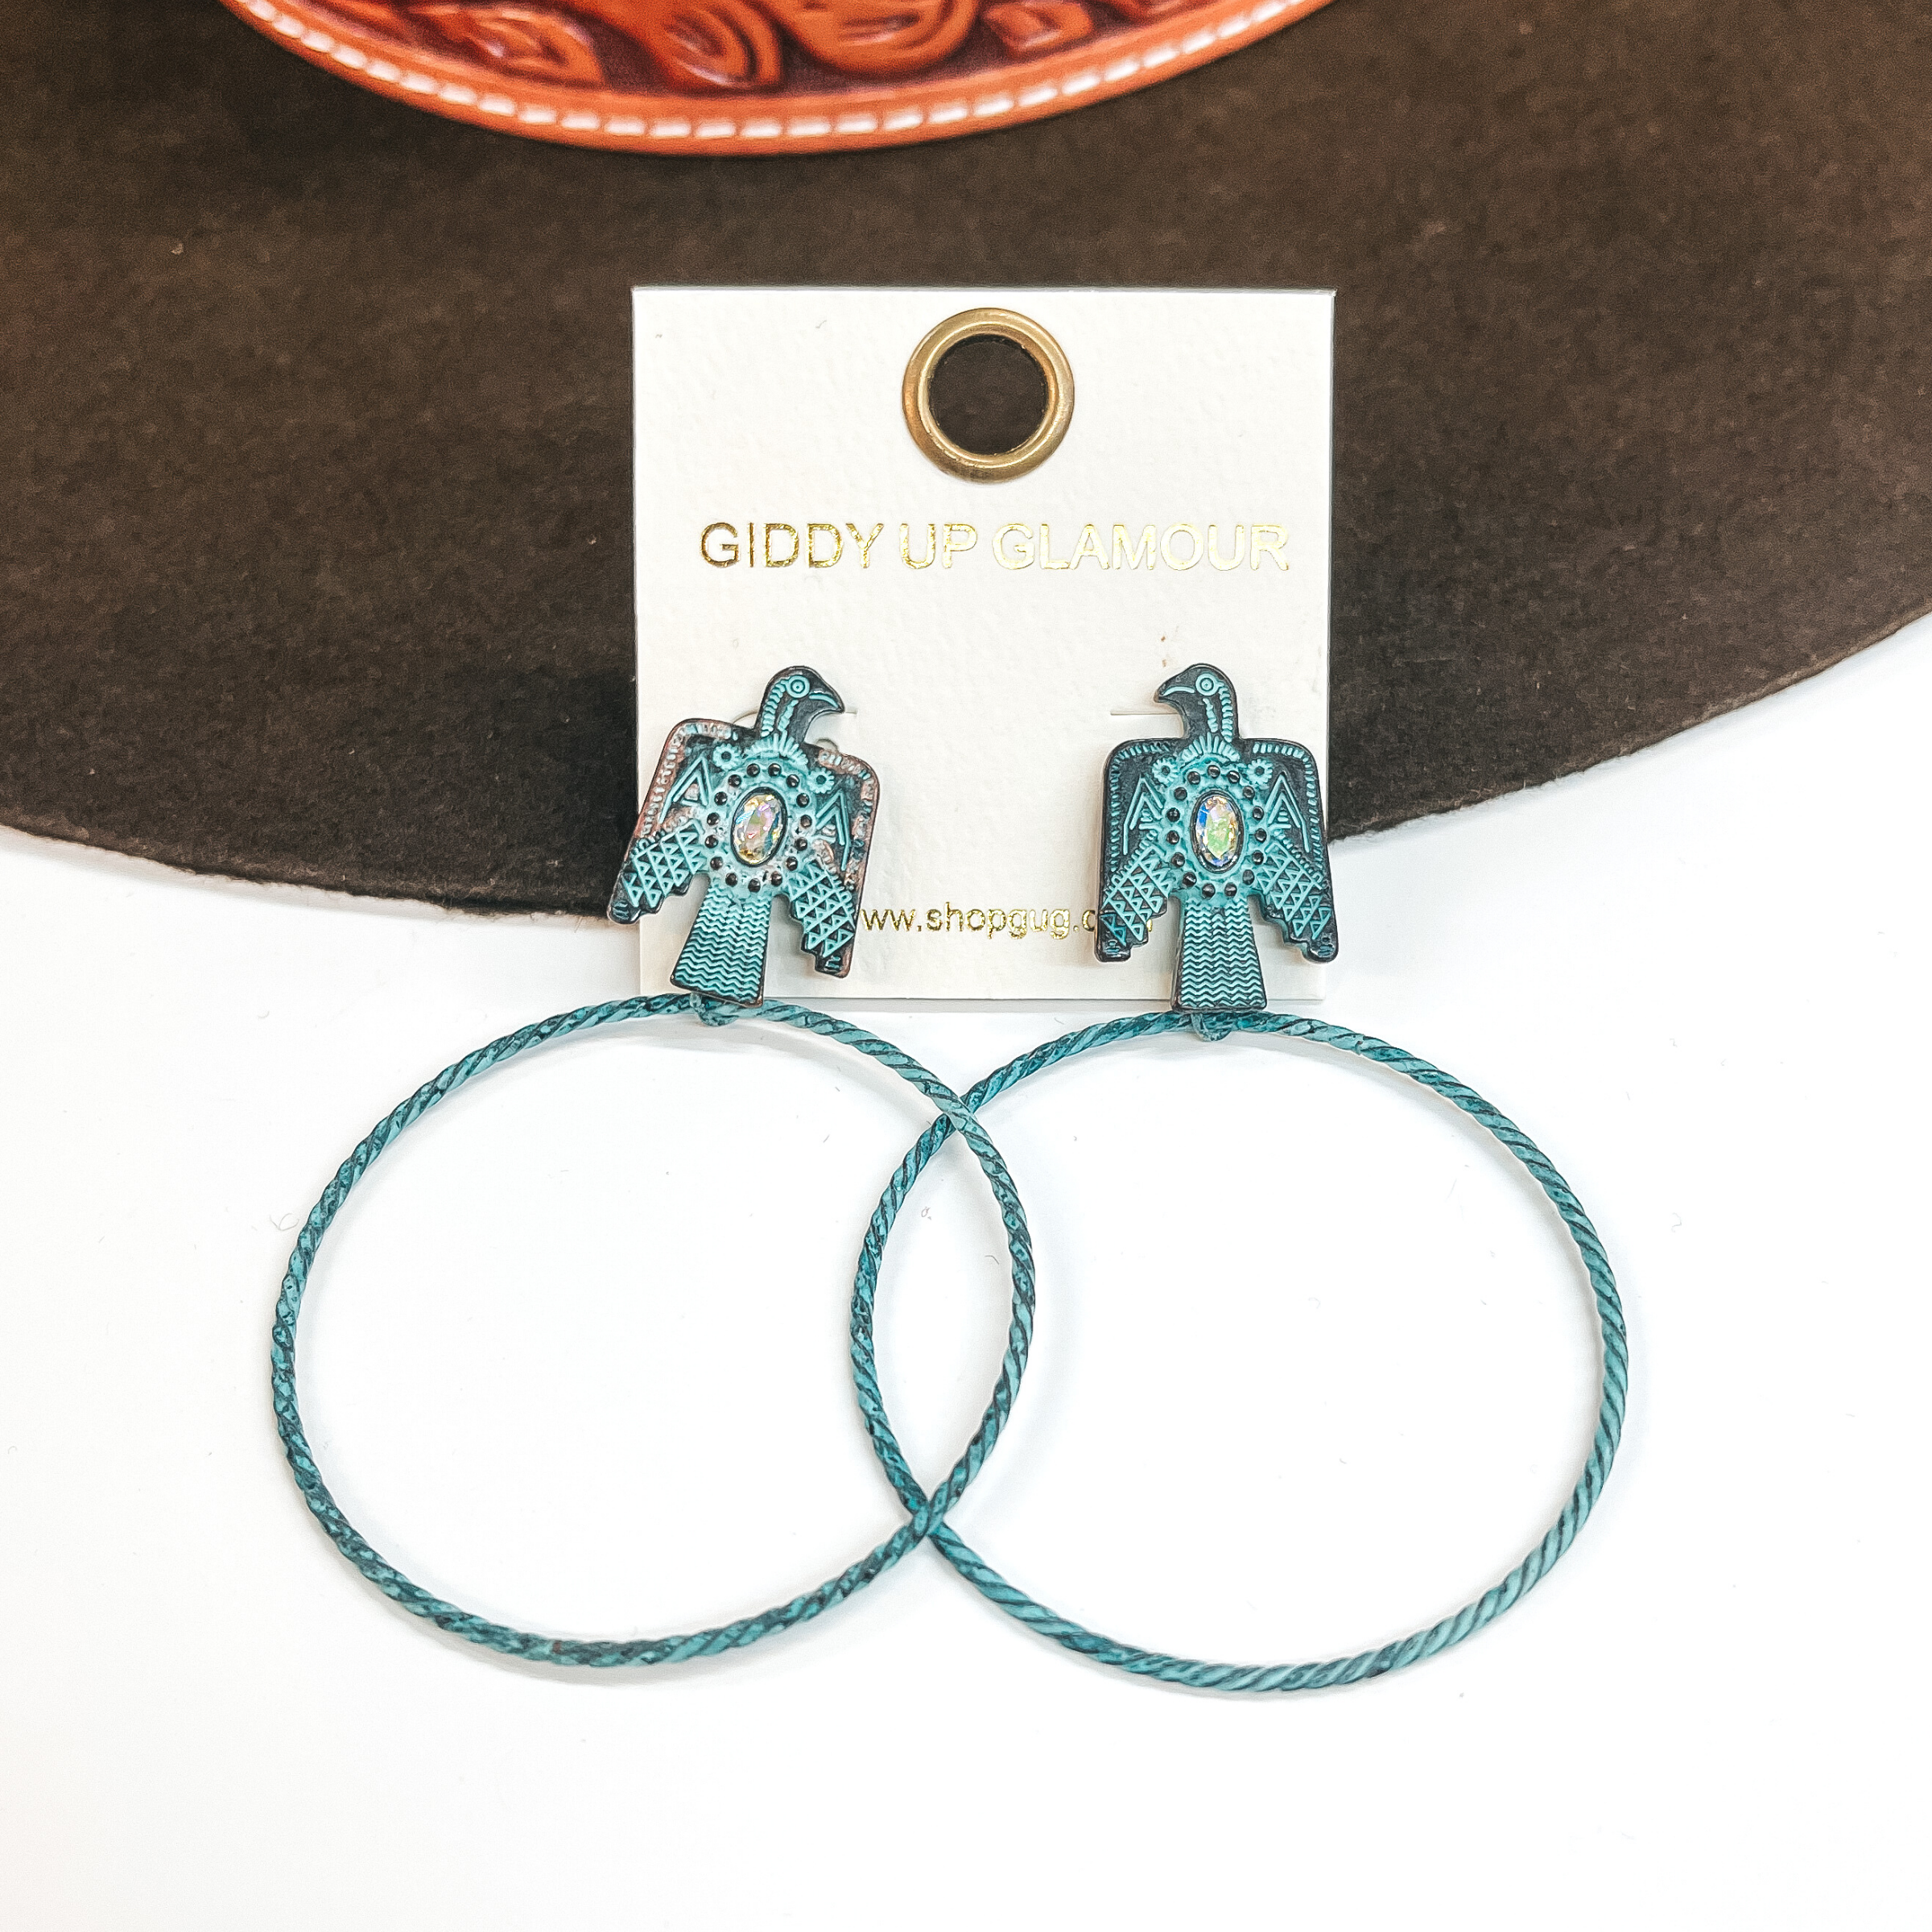 These are thunderbird post earrings with an AB  crystal in the center and a thin  circle drop in patina. These earrings are taken on  a white background and leaned up against a dark  brown hat. 